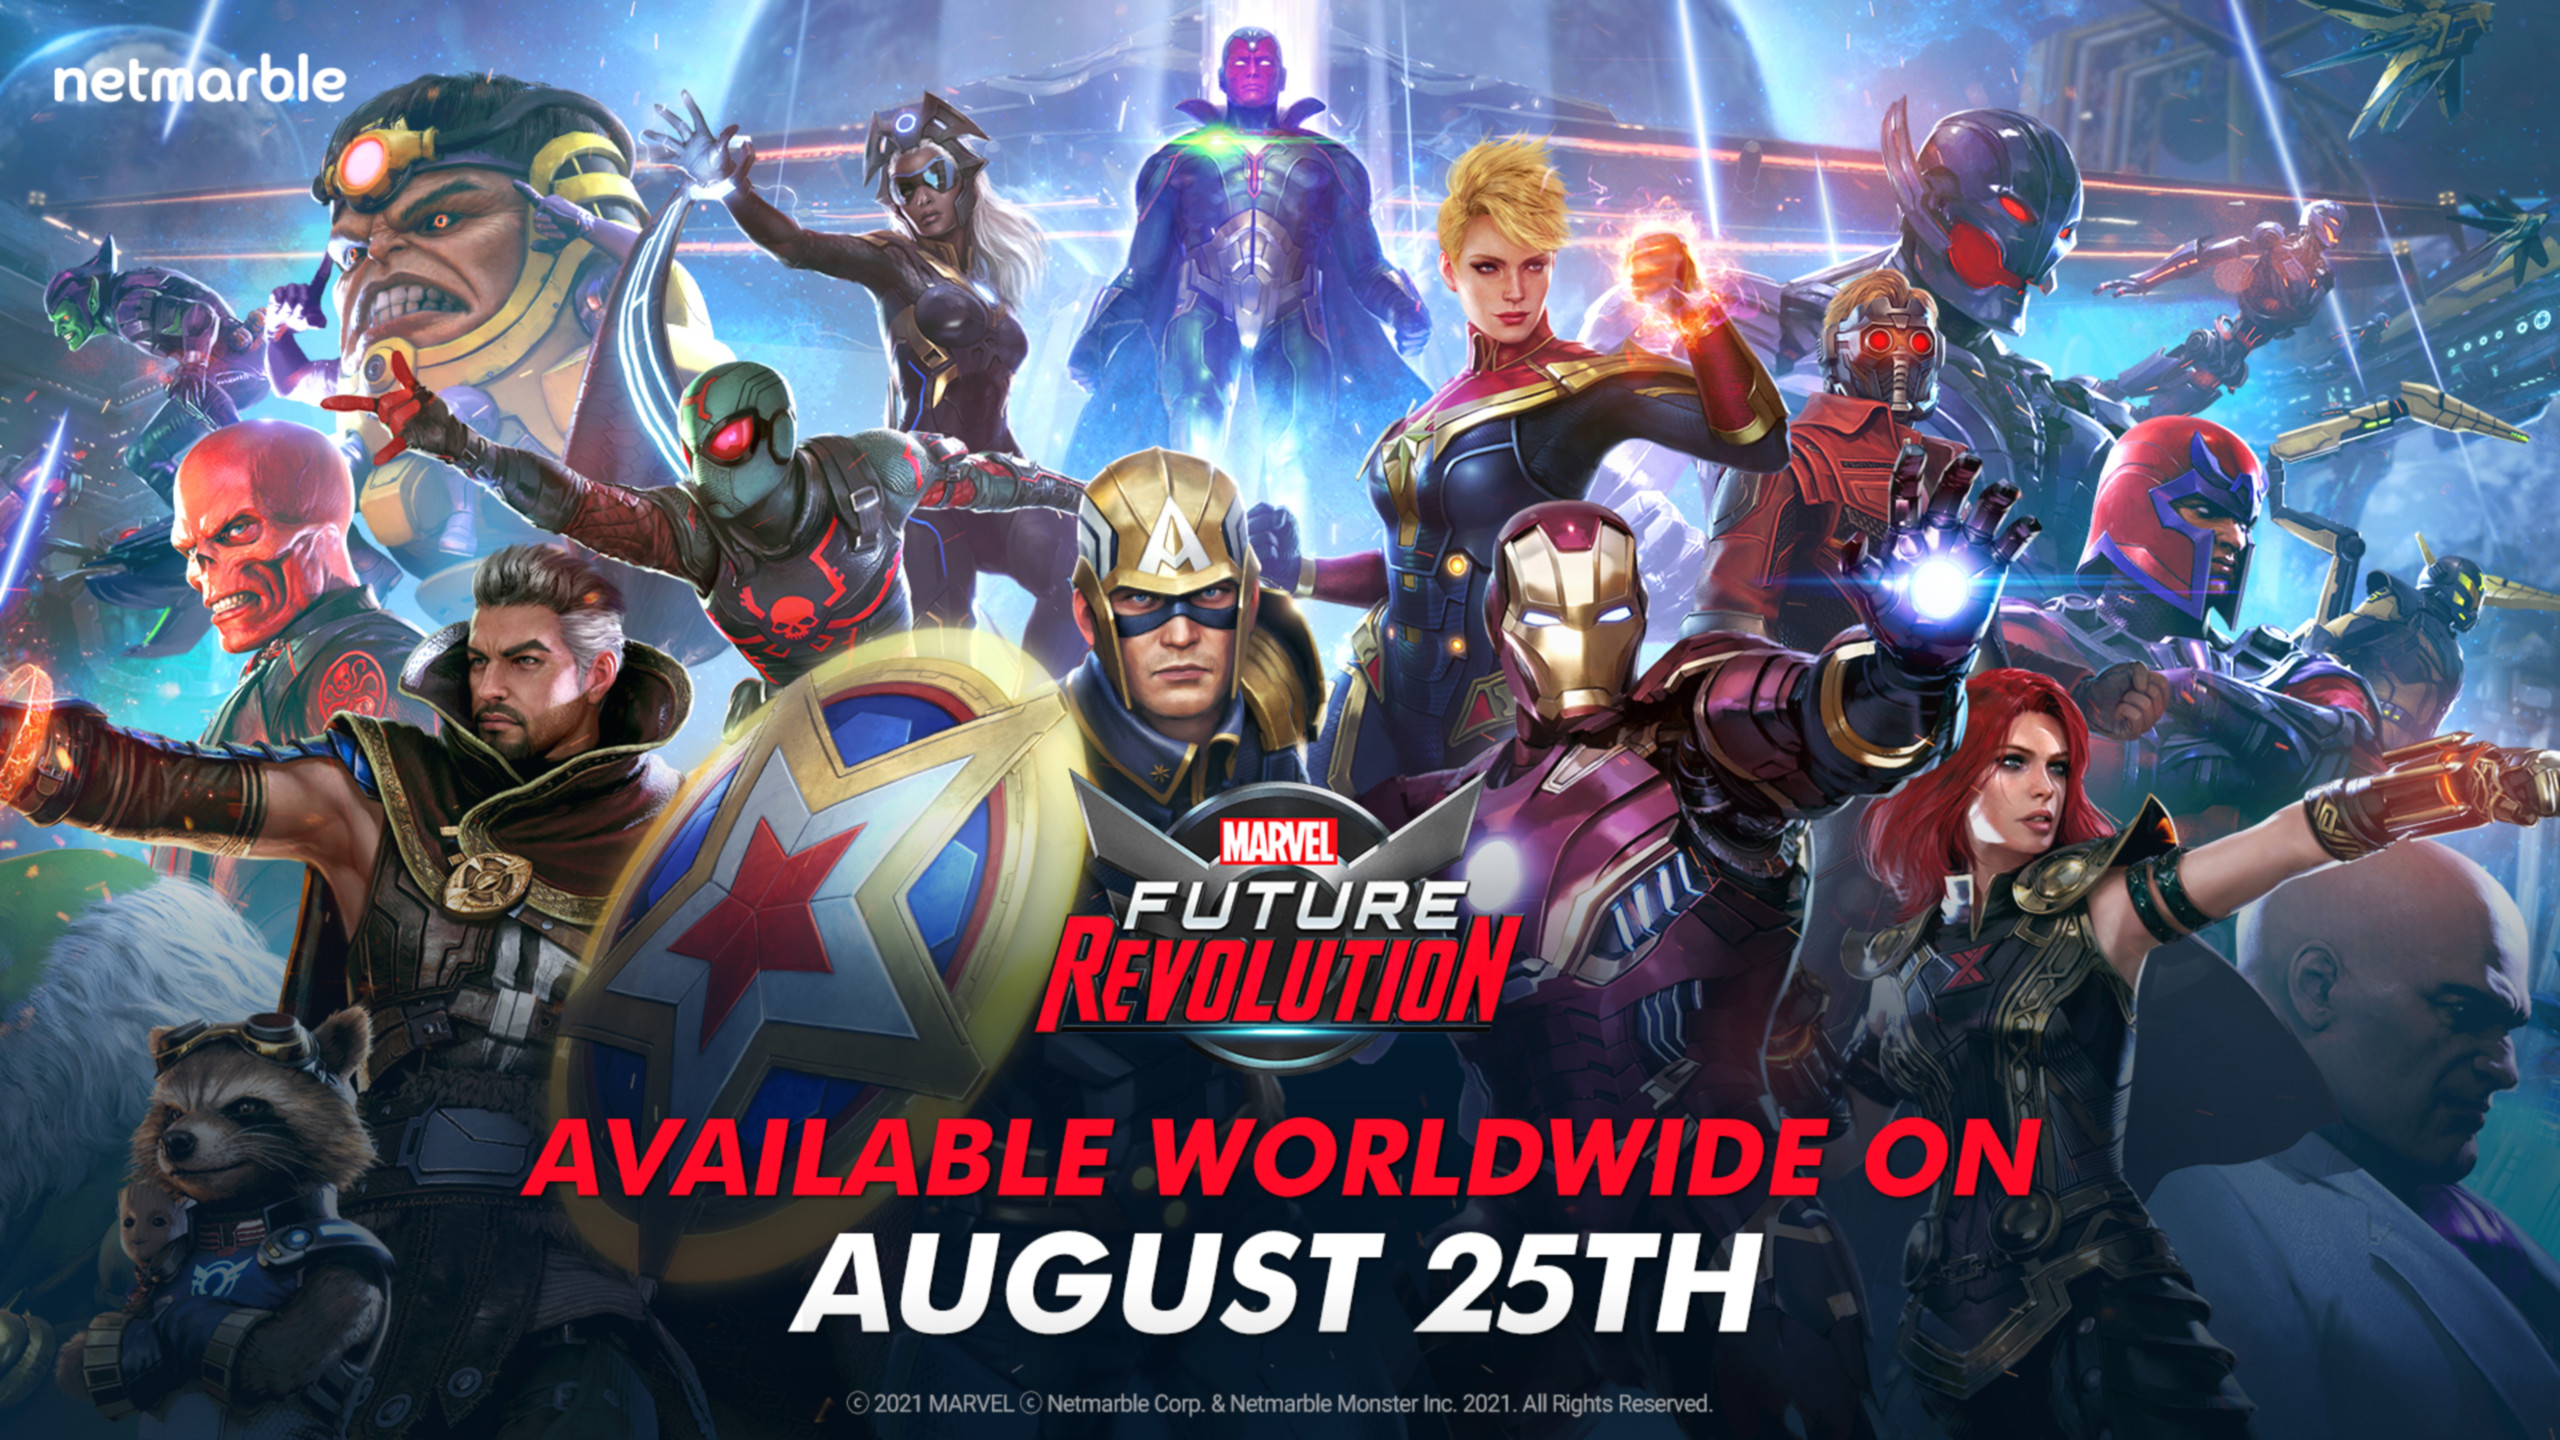 GET READY TO FIGHT ON-THE-GO WITH THE GLOBAL LAUNCH OF NETMARBLE'S